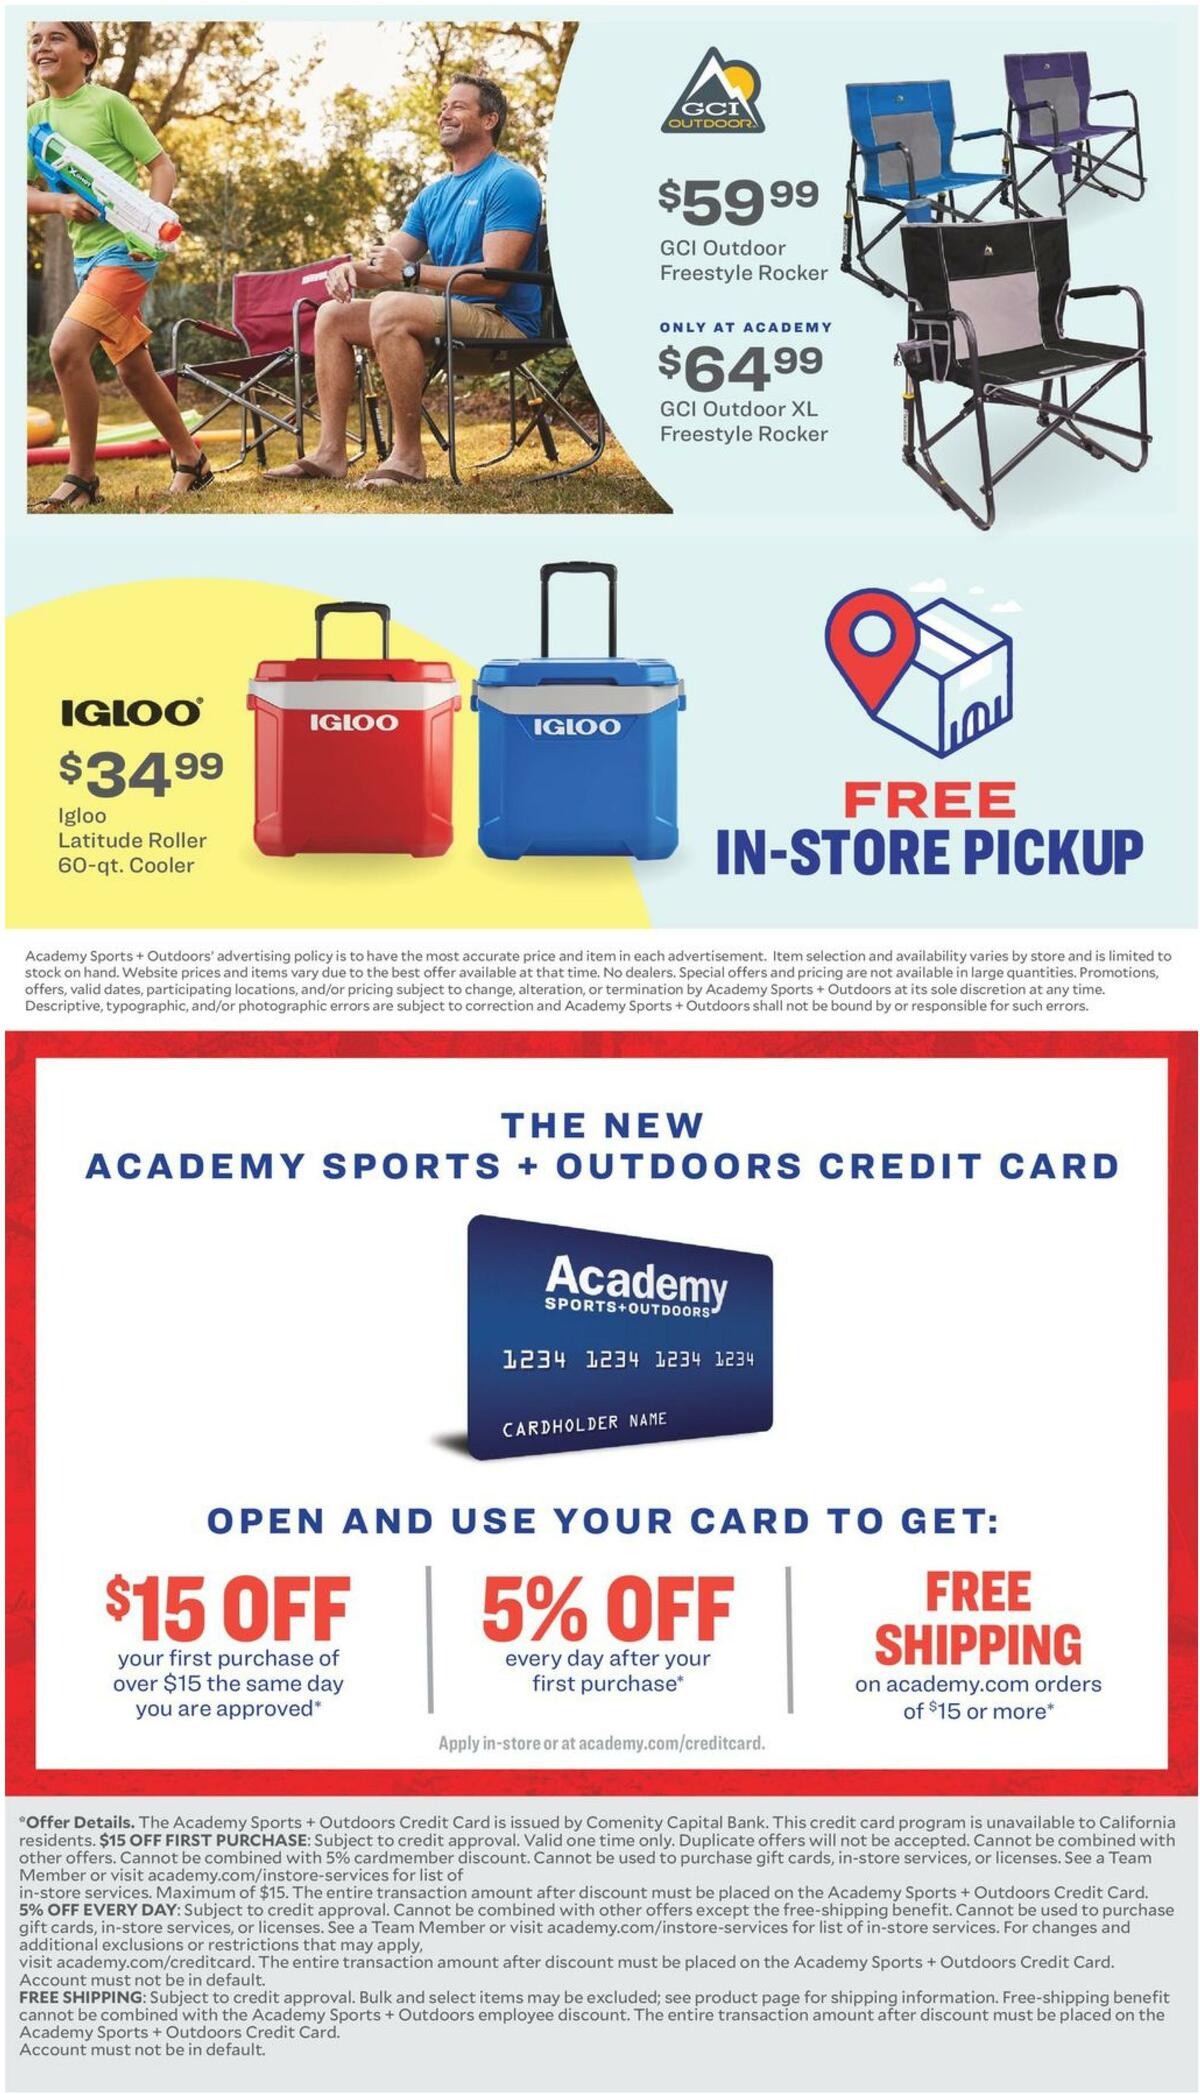 Academy Sports + Outdoors Summer Fun Guide Weekly Ad from May 18